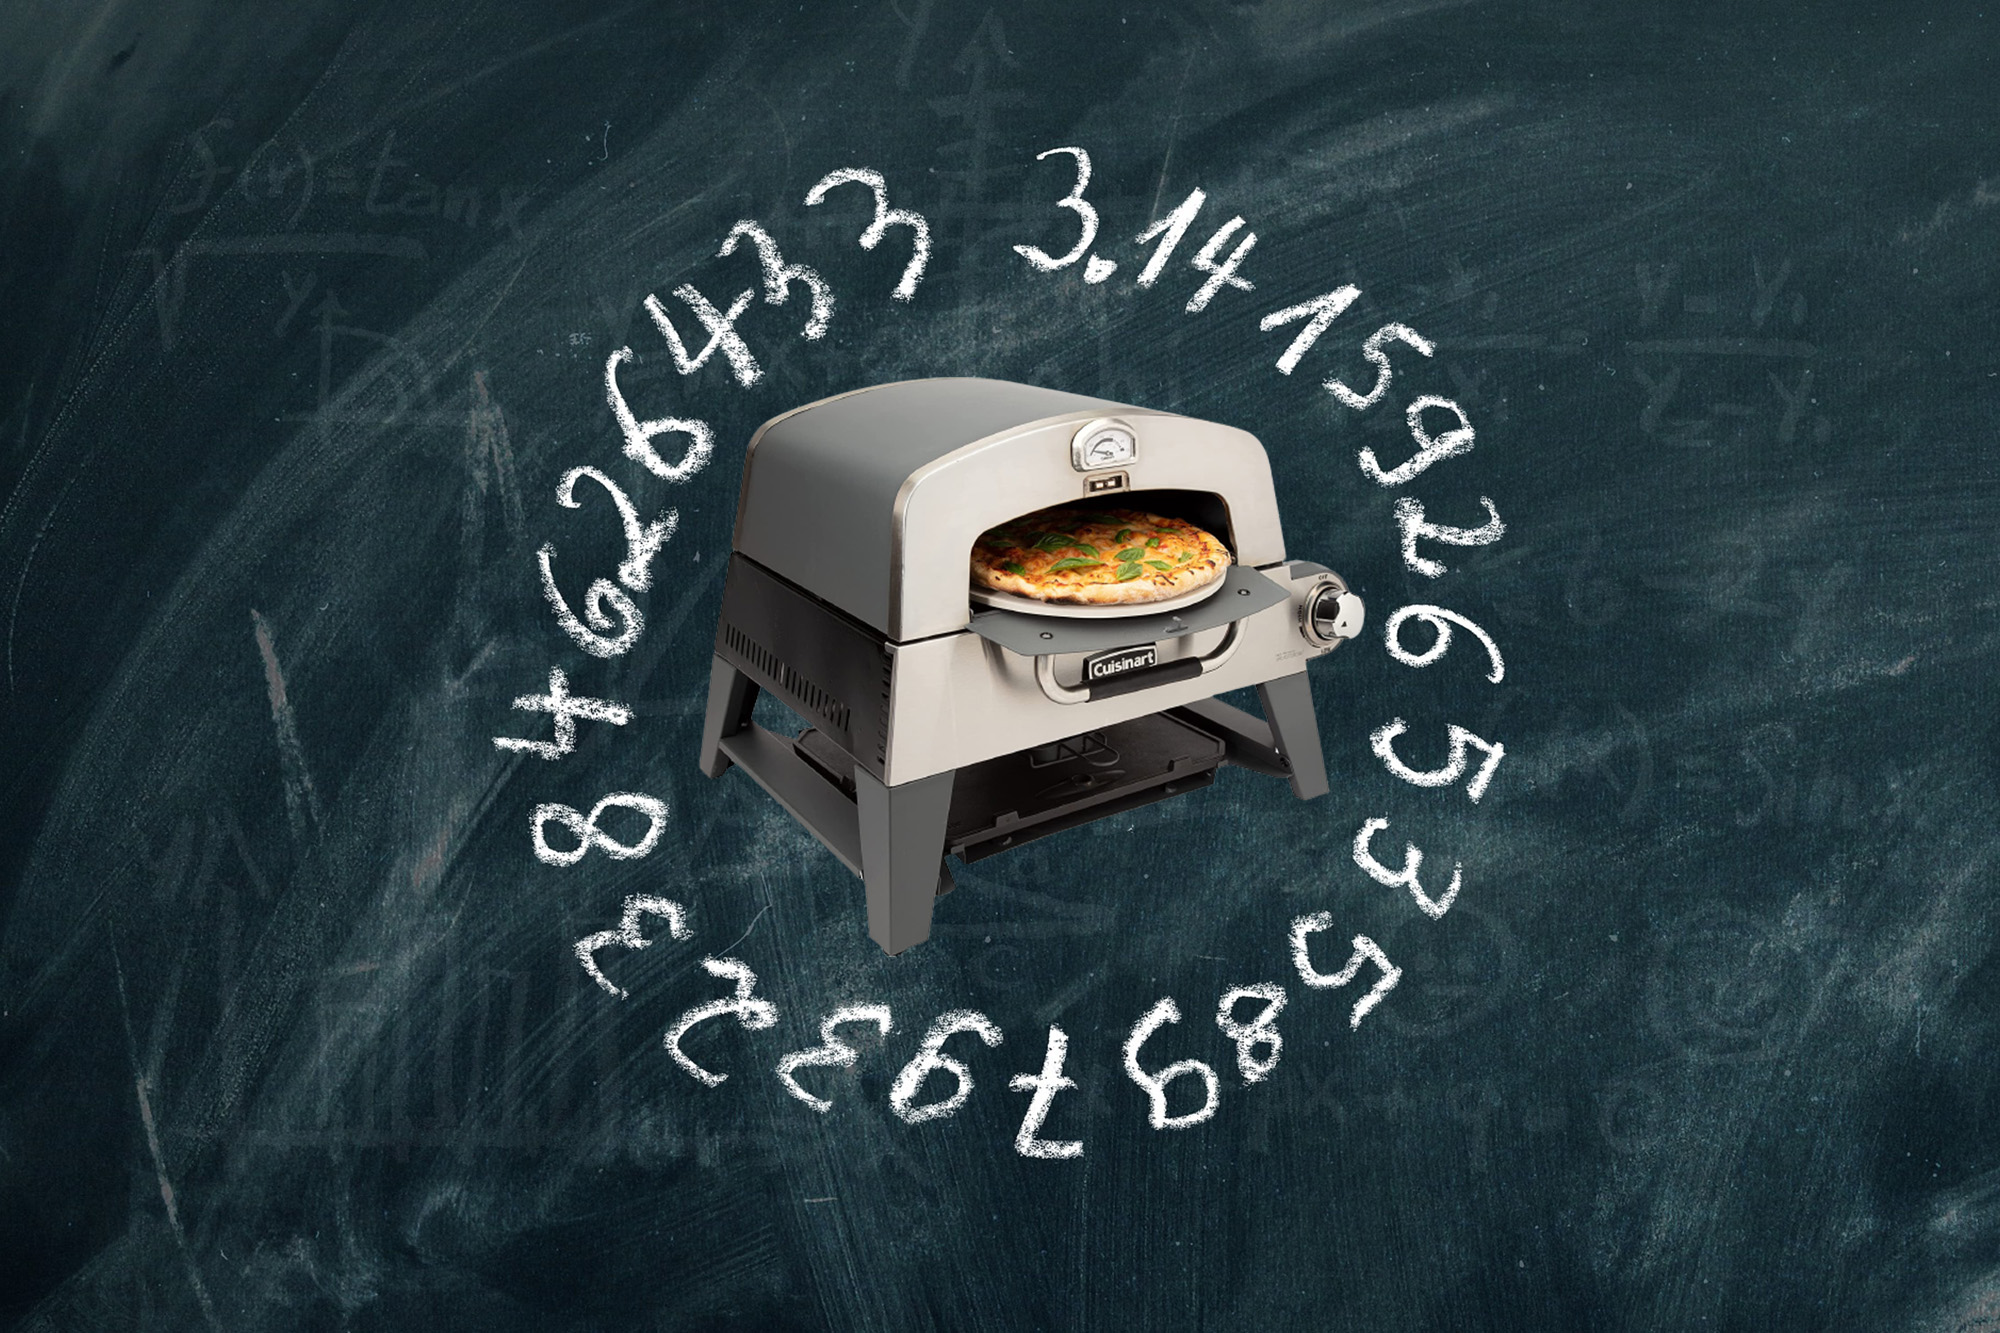 A pizza oven on a chalkboard surrounded by the numbers of Pi